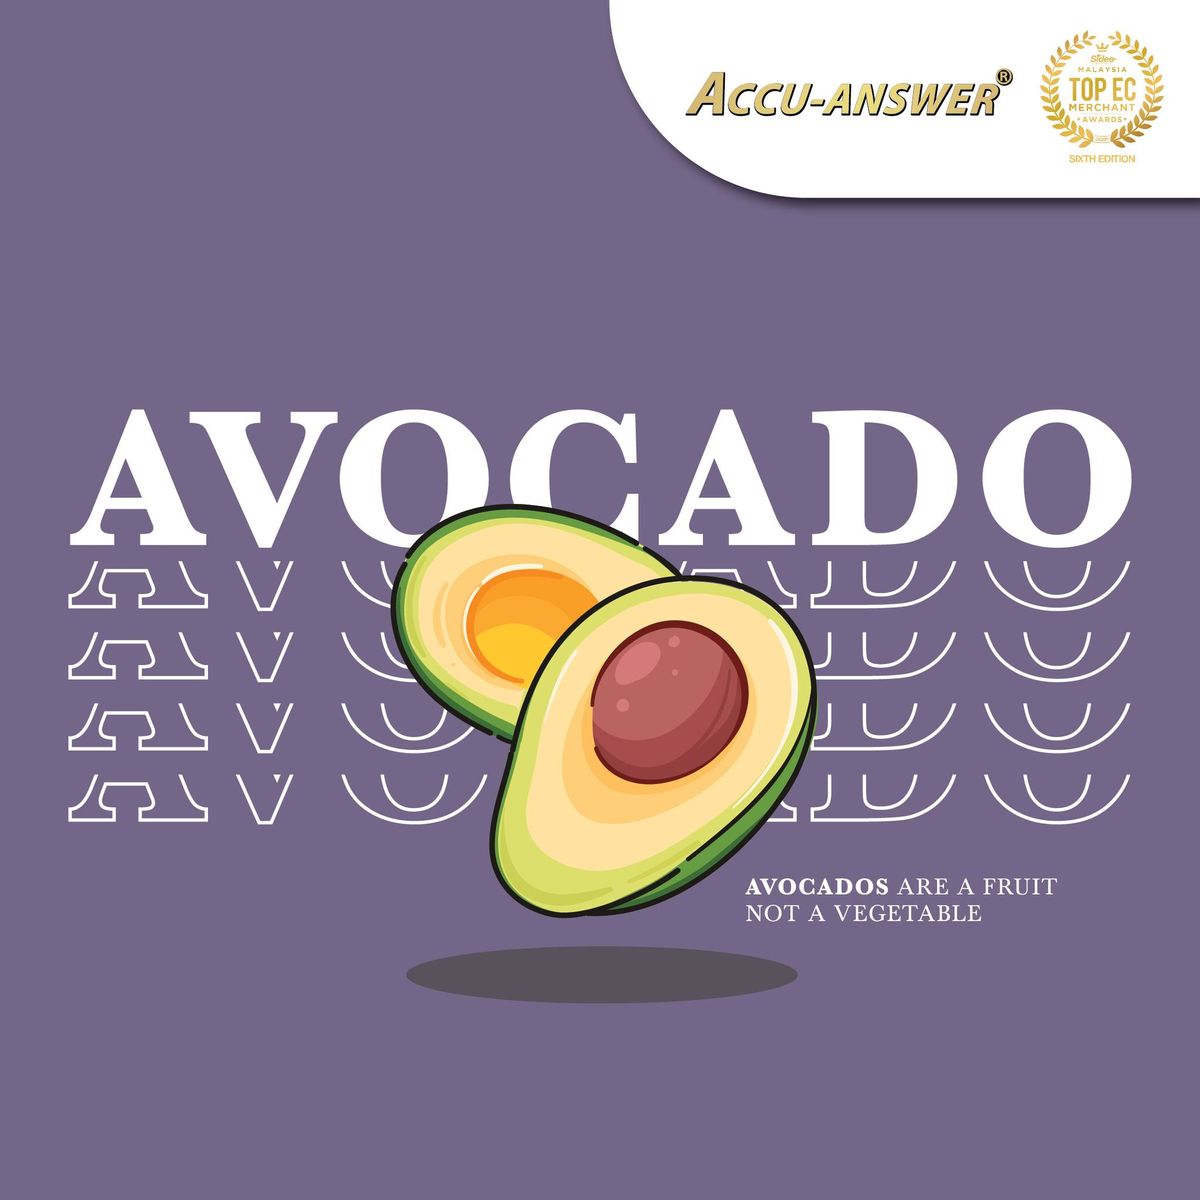 Little did you know that Avocado is a part of fruit?